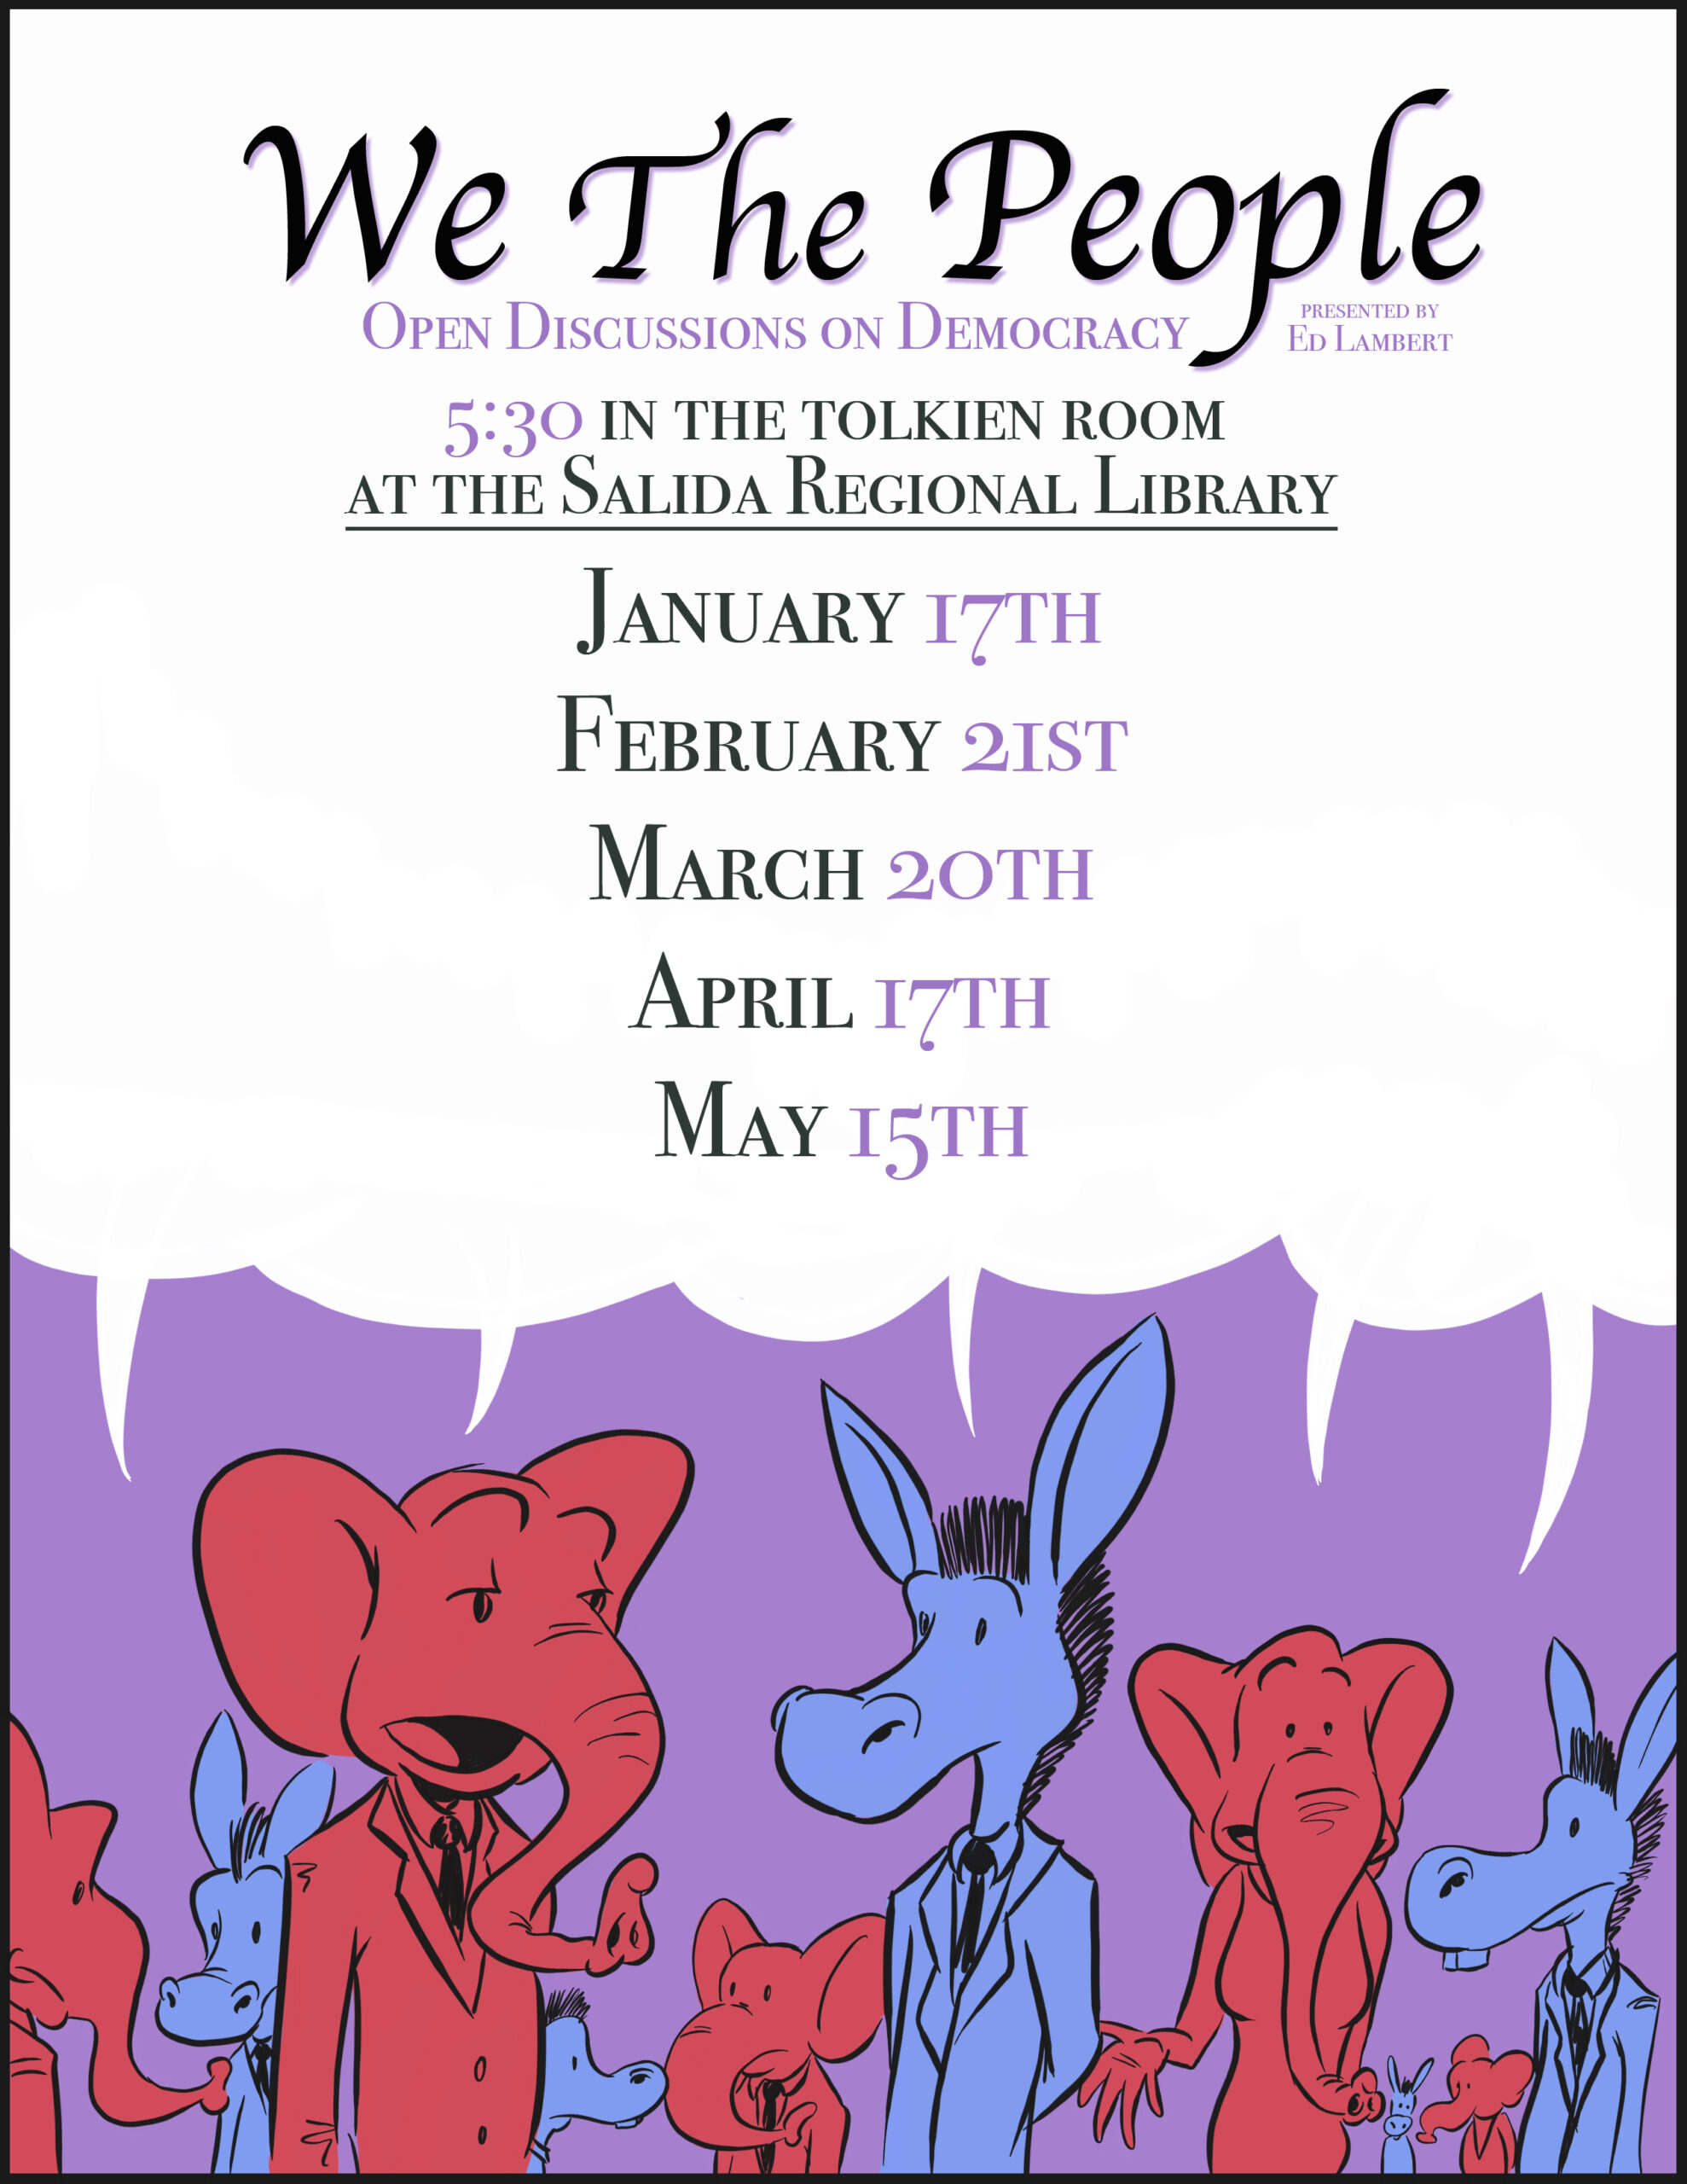 We the People Open Discussions on Democracy presented by Ed Lambert. 5:30 in the Tolkien Room at the Salida Regional Library. January 17, February 21, March 20, April 17, May 15.